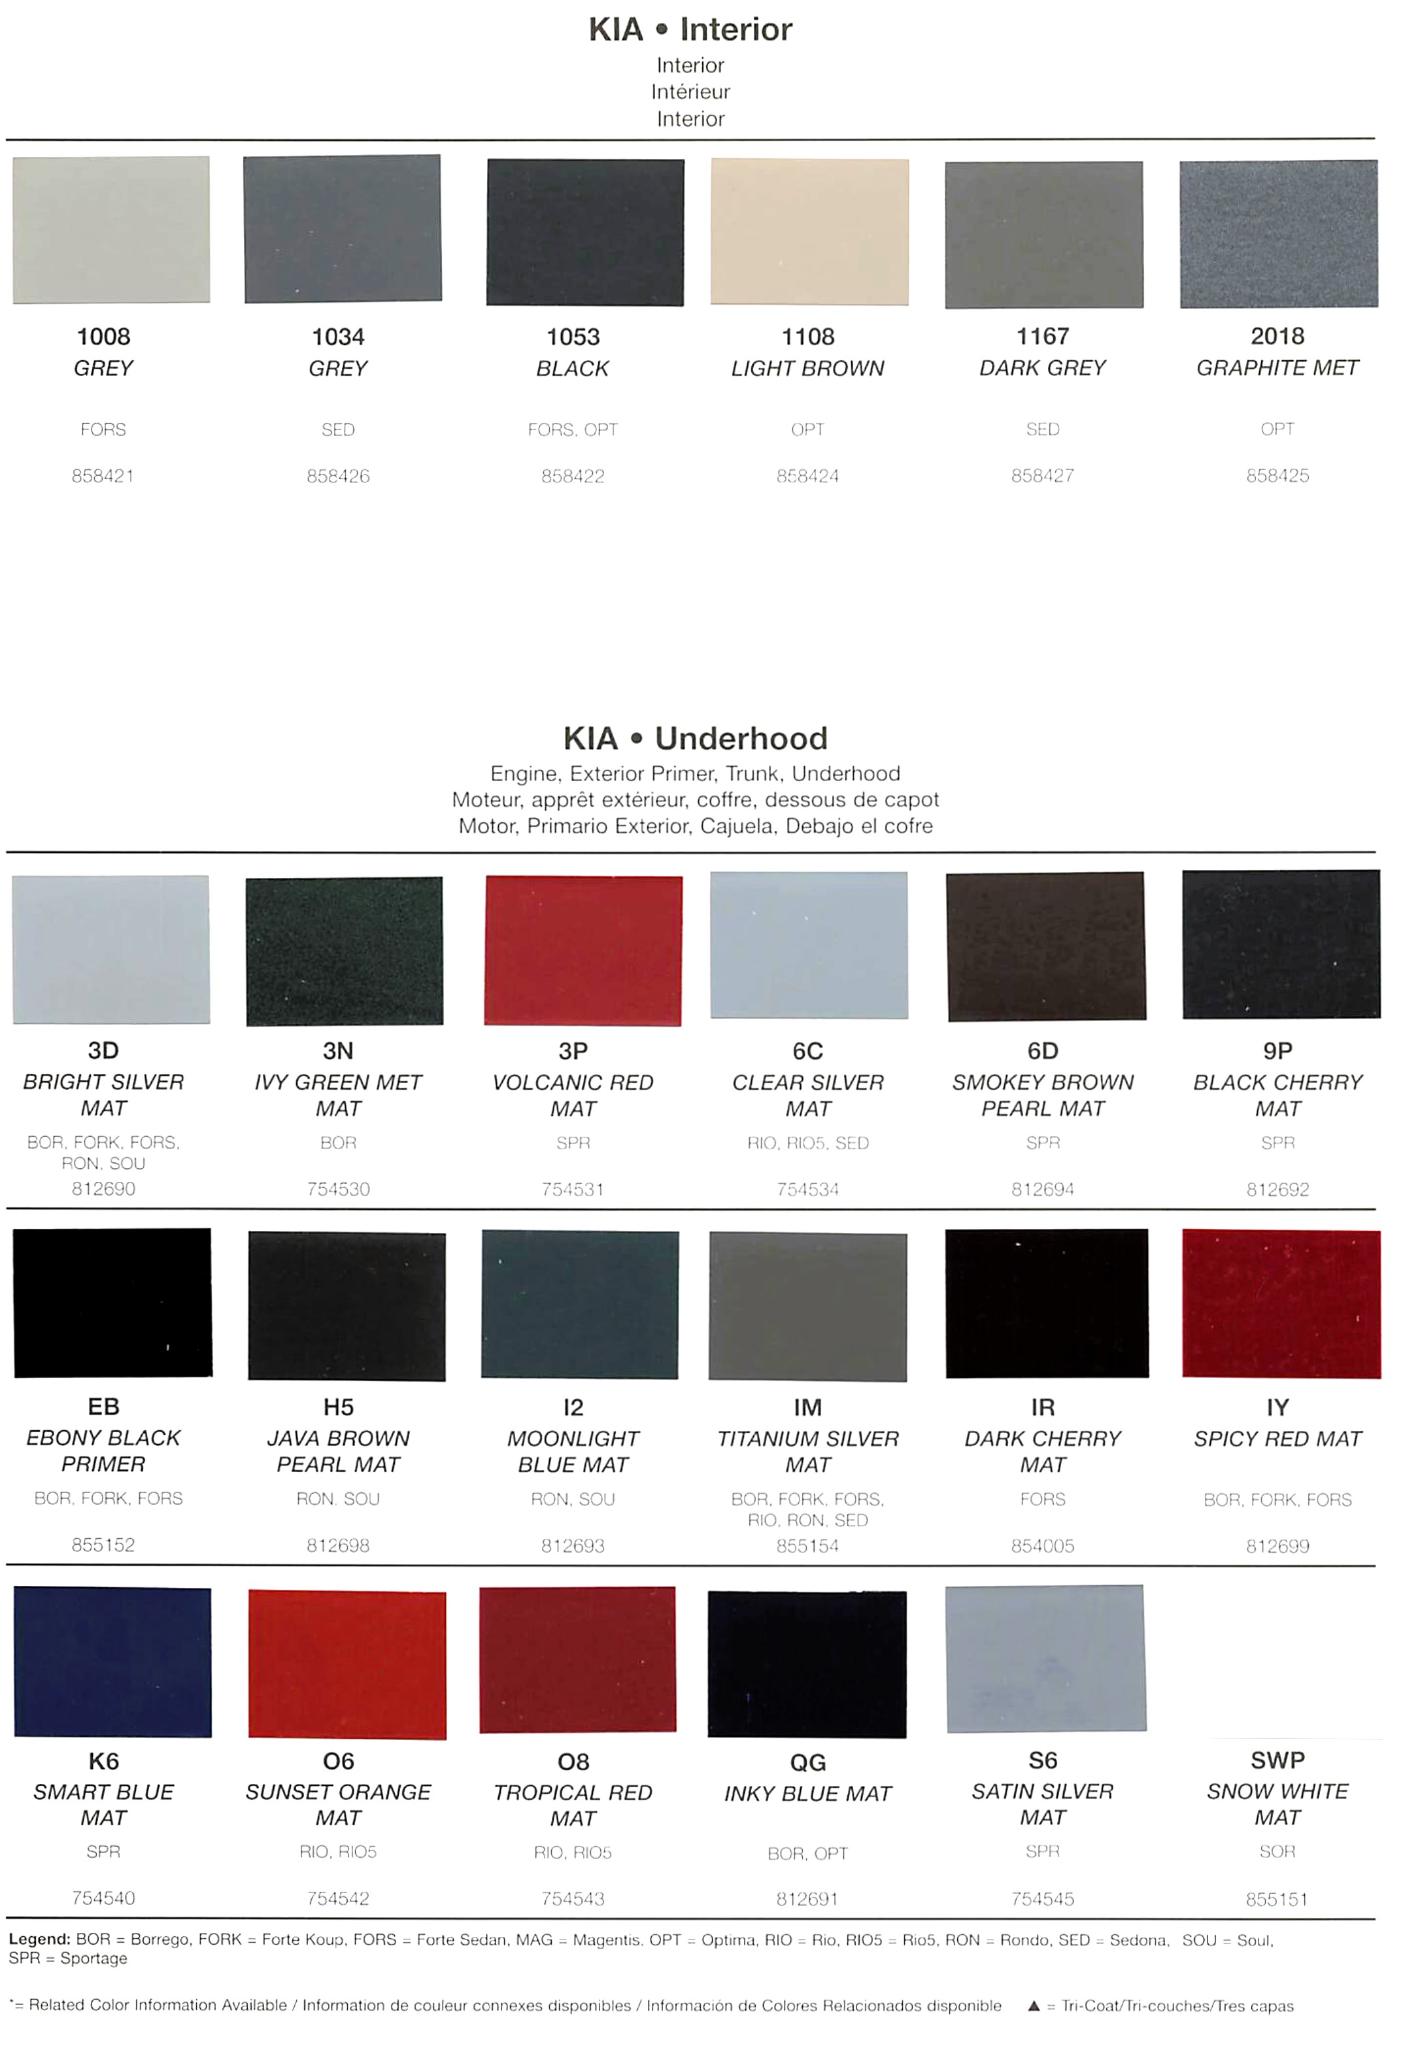 color swatches and codes for various models of kia in 2010